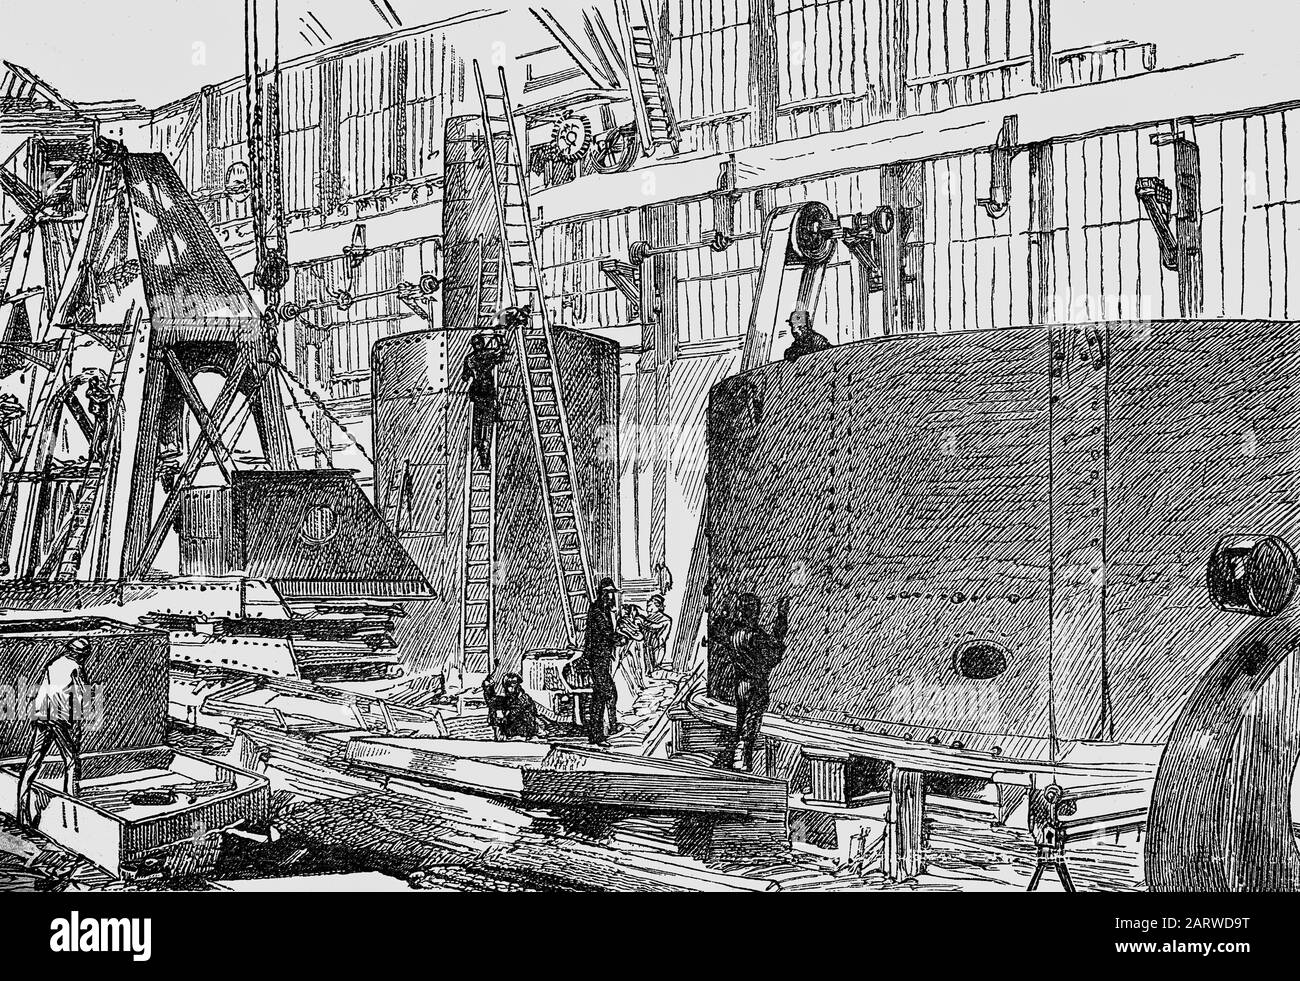 Making gun turrets for HMS Victoria Royal Navy battleship in 1893, in the Armstrong Whitworth, Elswick works, manufacturing concern on Tyneside founded in 1847 by engineer William George Armstrong (1810- 1900), an English engineer and industrialist. Stock Photo